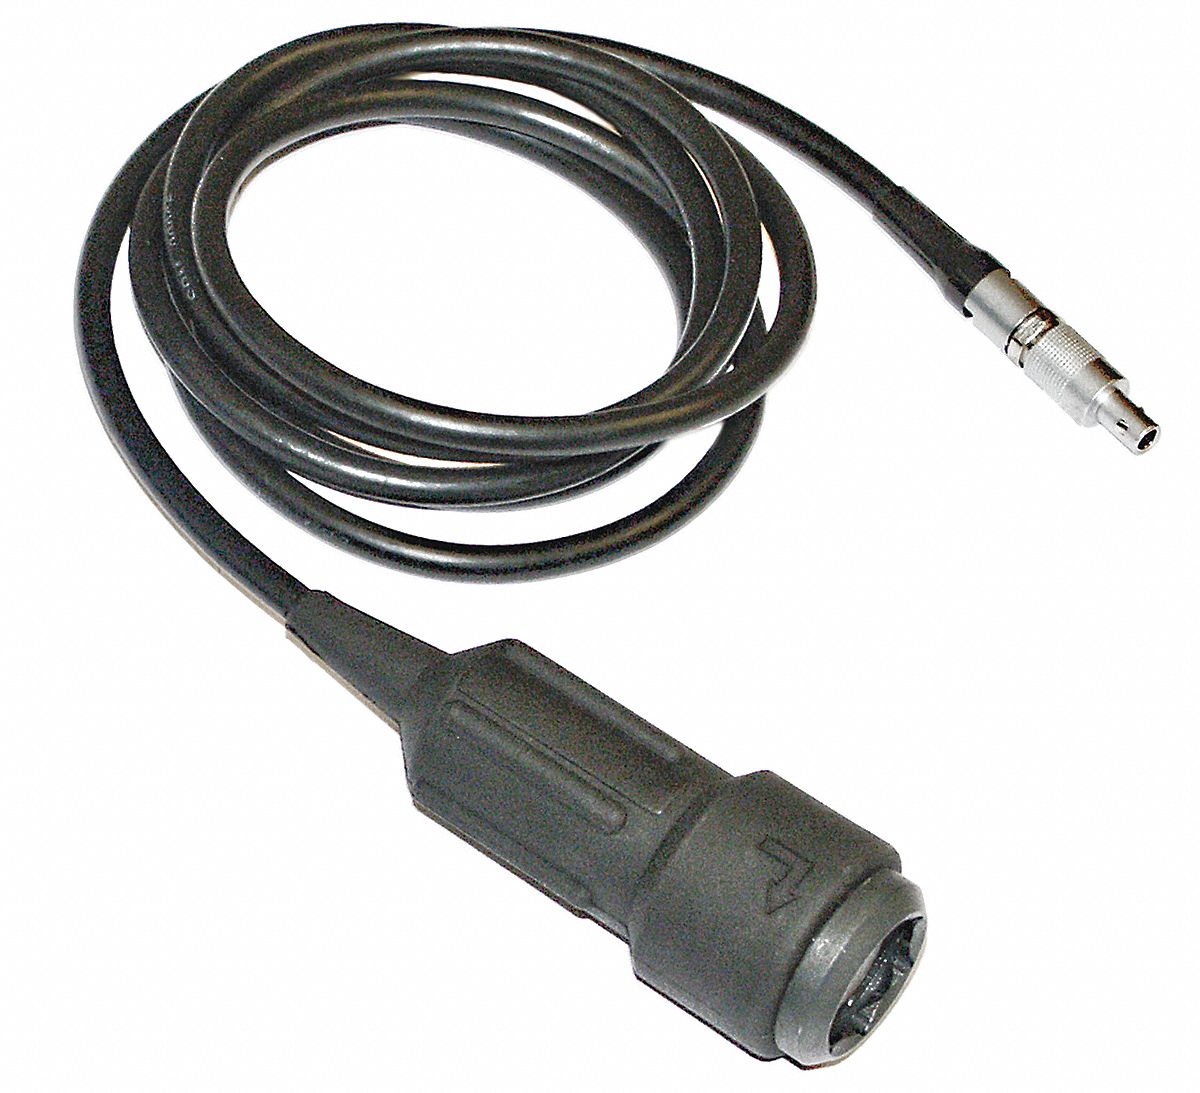 Quick Connector Transducer: 4PJV6, Enables User to Attach 4PJV6 to Permanently Mounted Adapters